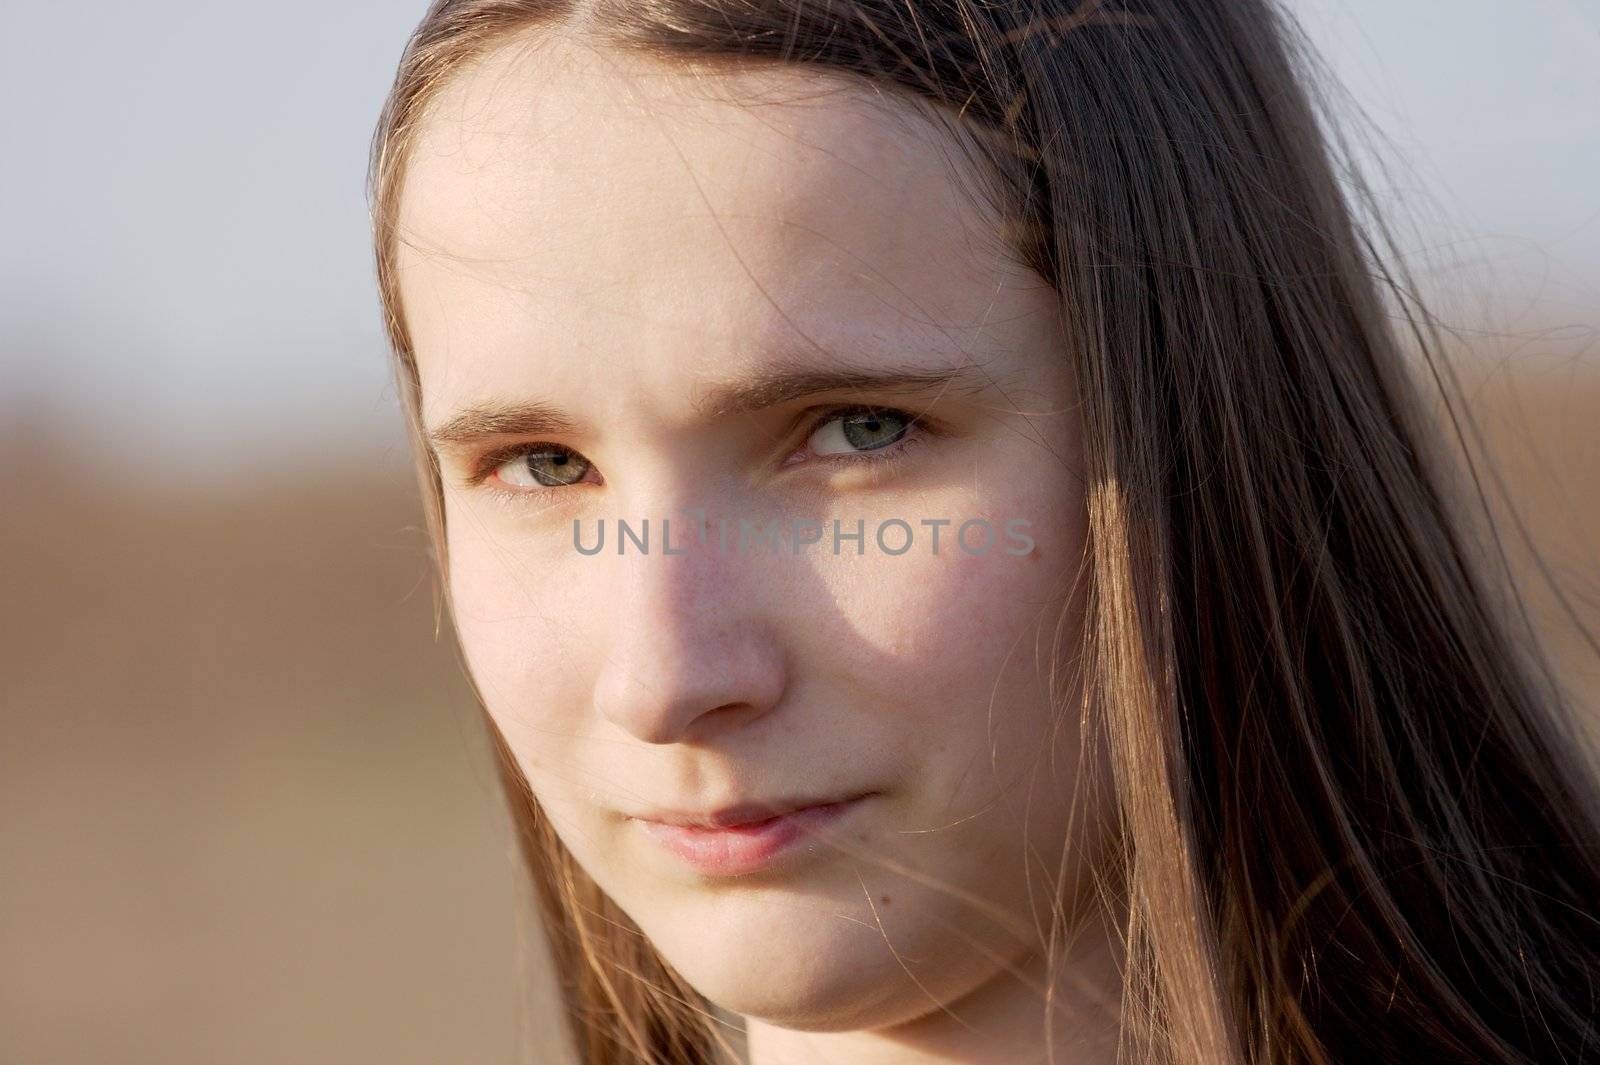 Outdoor portrait of girl with long hair in the wind